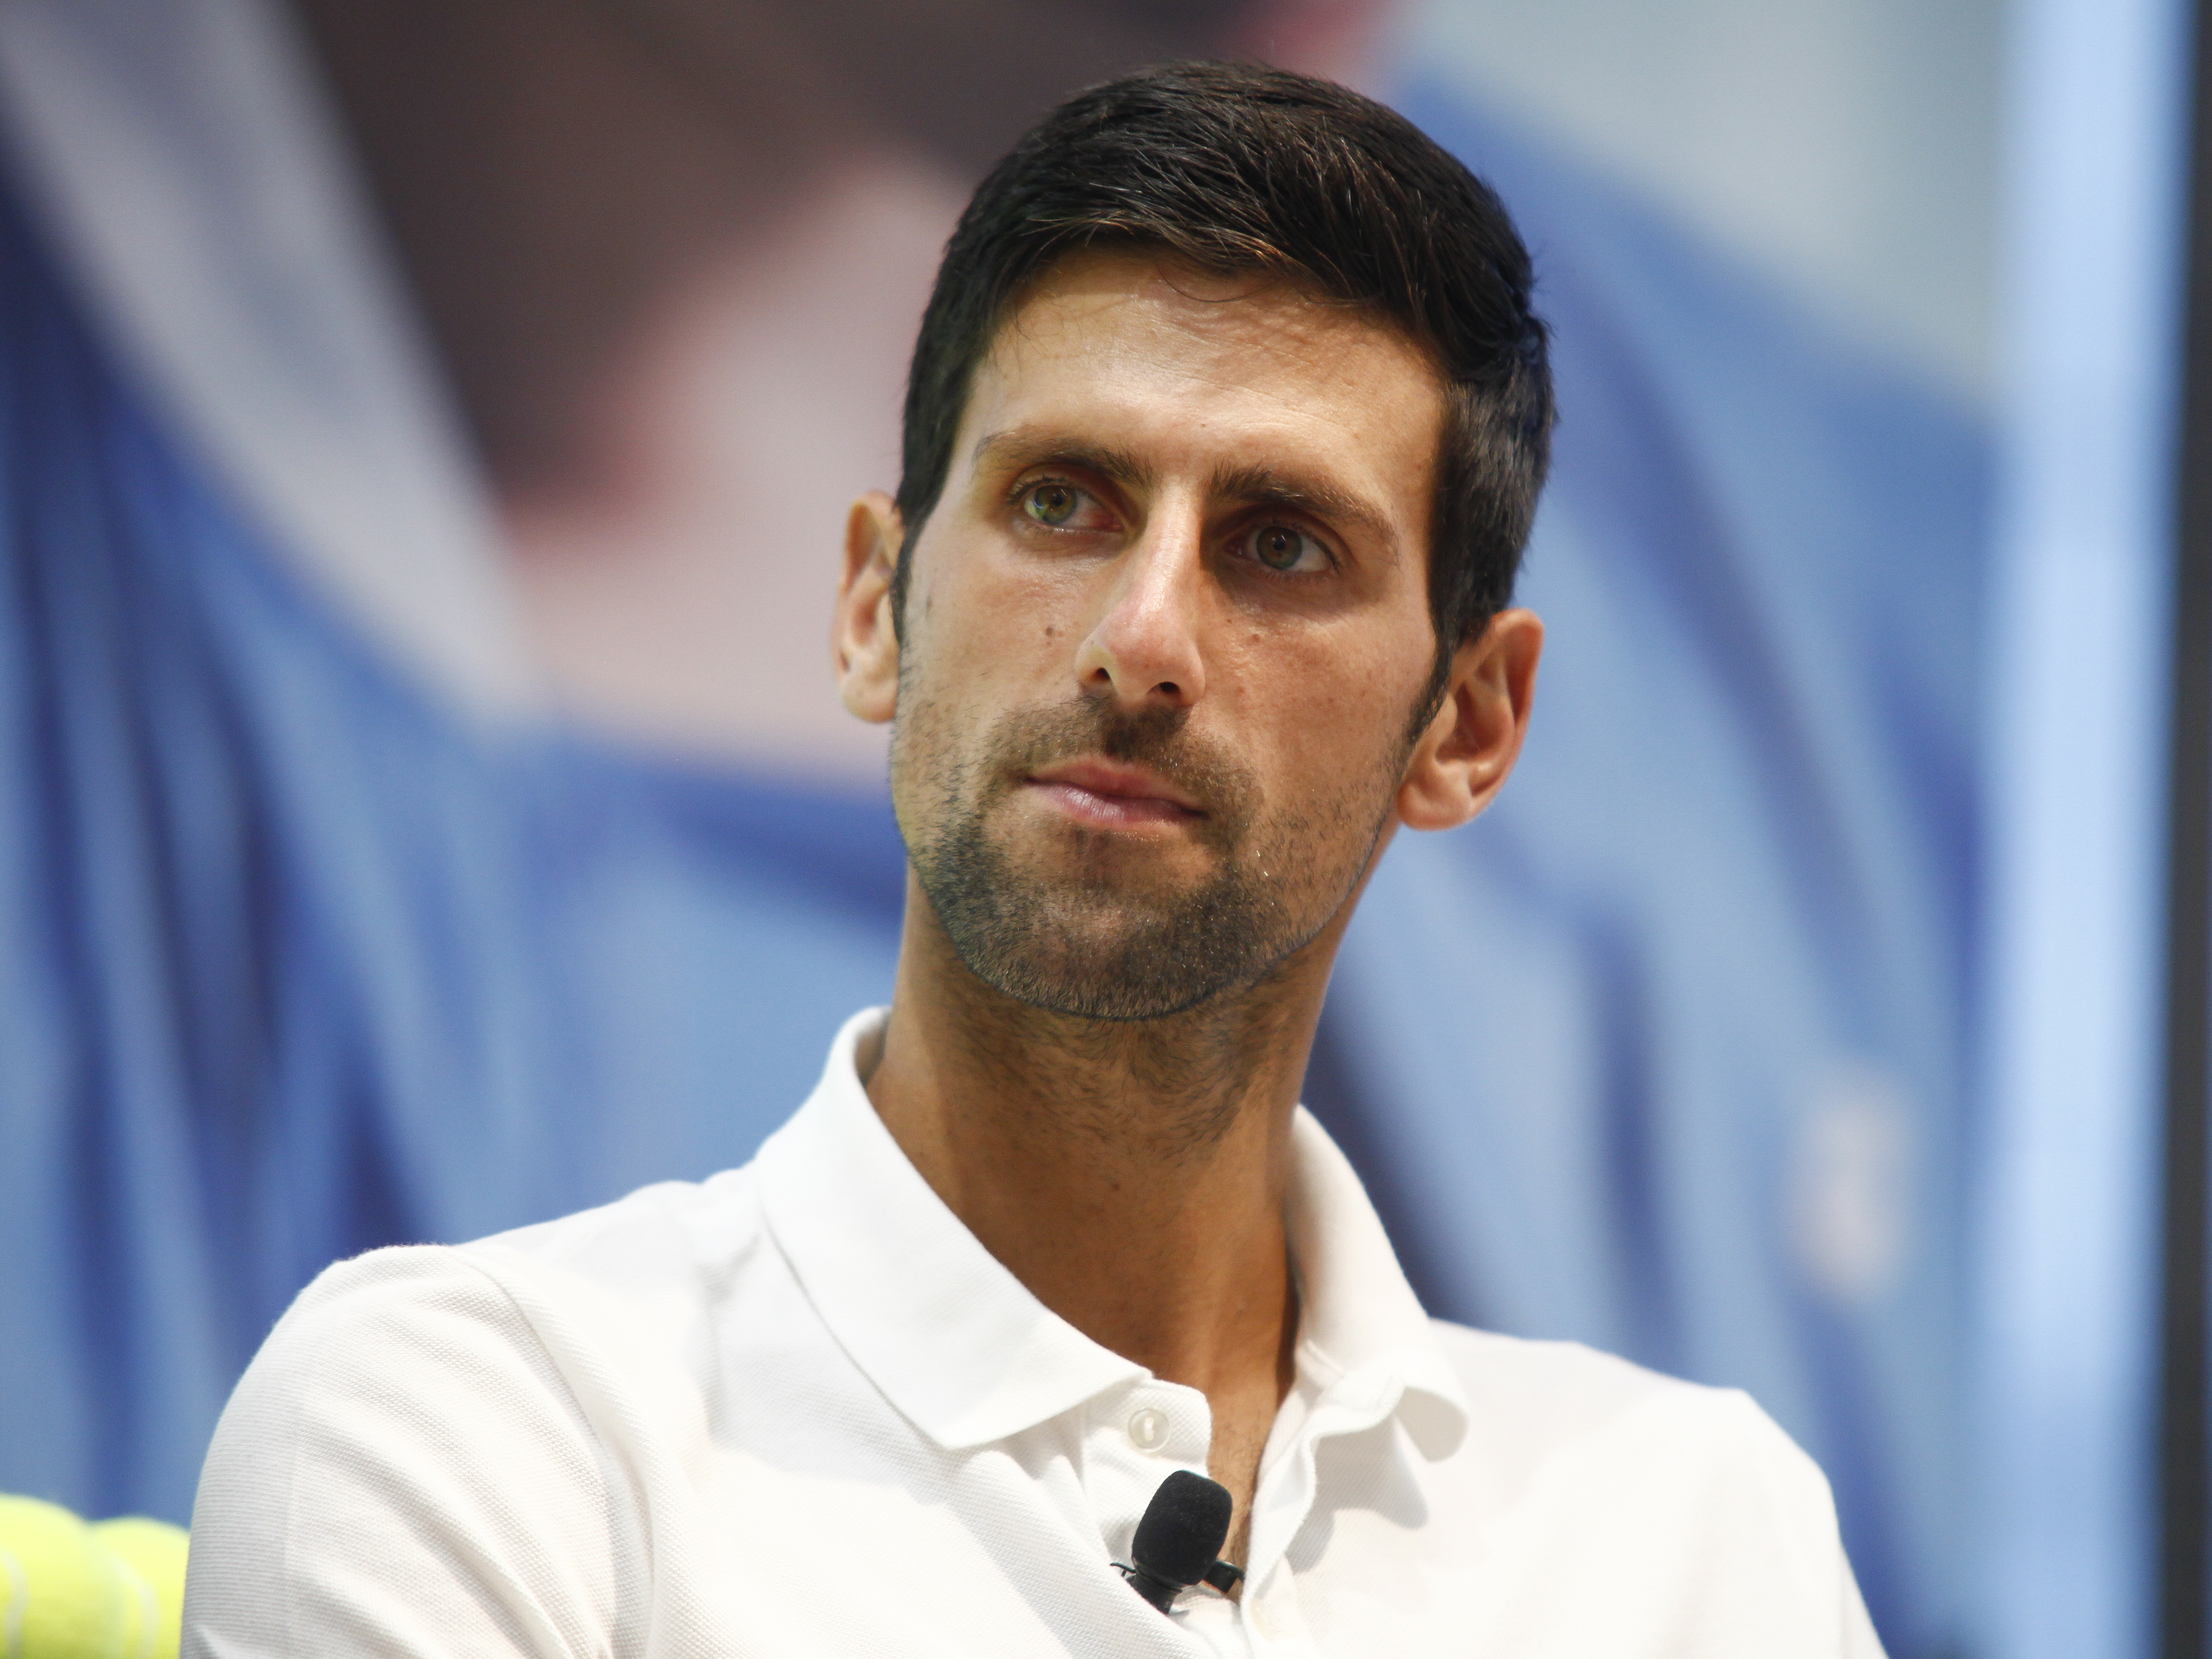 Professional tennis player Novak Djokovic makes an appearance at the ASICS Flagship Store on Wednesday, Aug. 22, 2018, in New York.